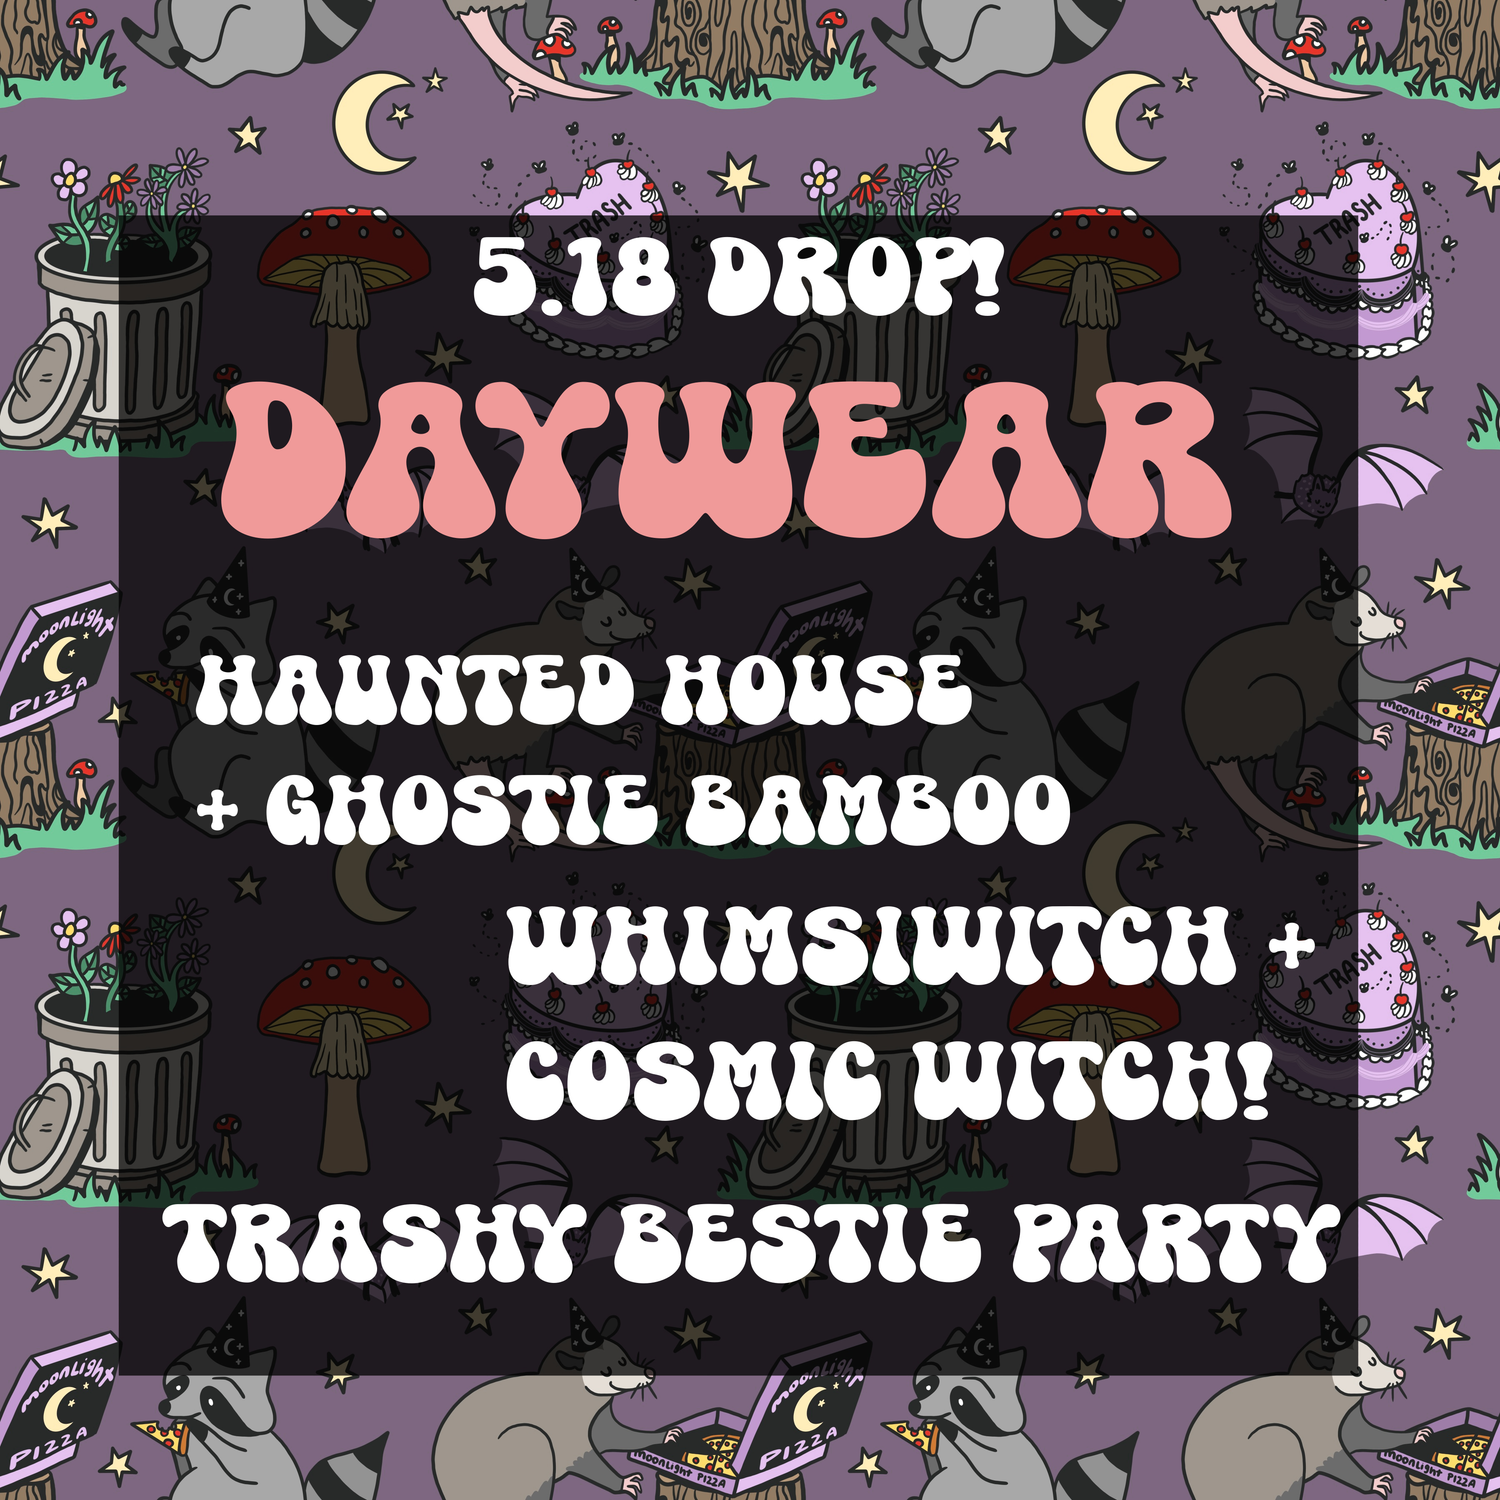 ALL PREORDERS -5/18- TRASH PARTY + HAUNTED HOUSES + COSMIC + WHIMSIWITCH!